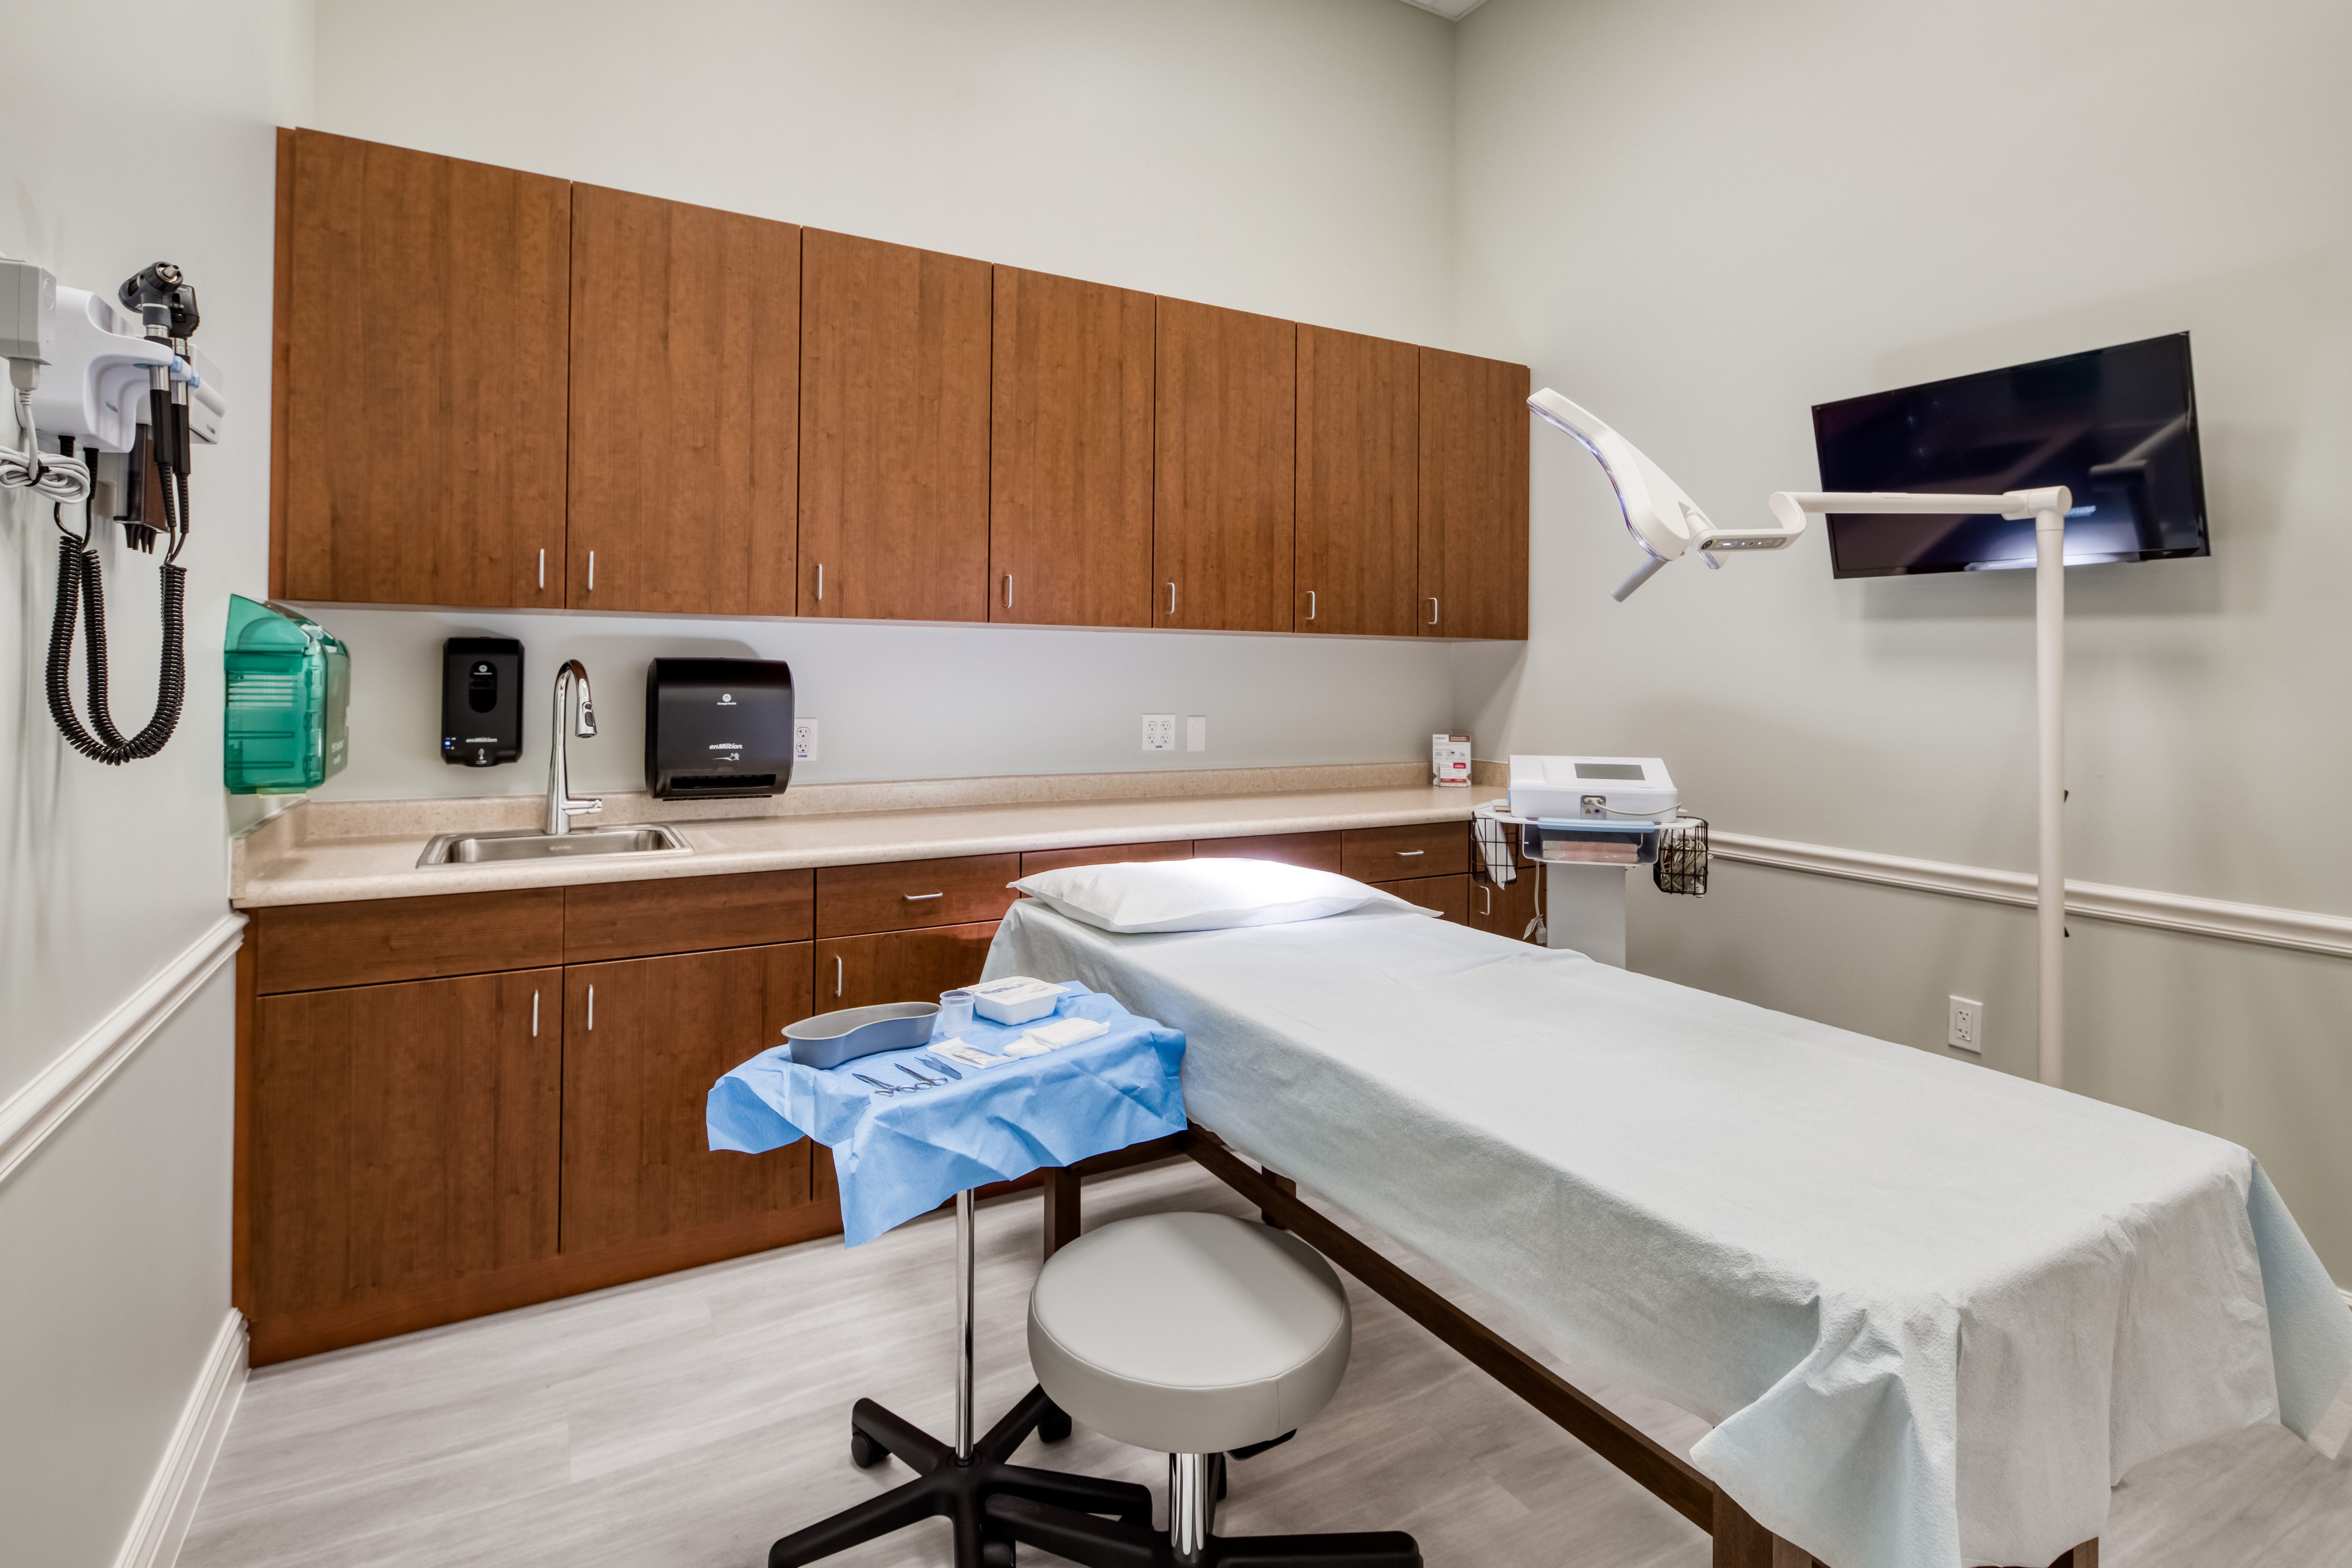 Our state-of-the-art, physician-led clinics operate around your schedule.